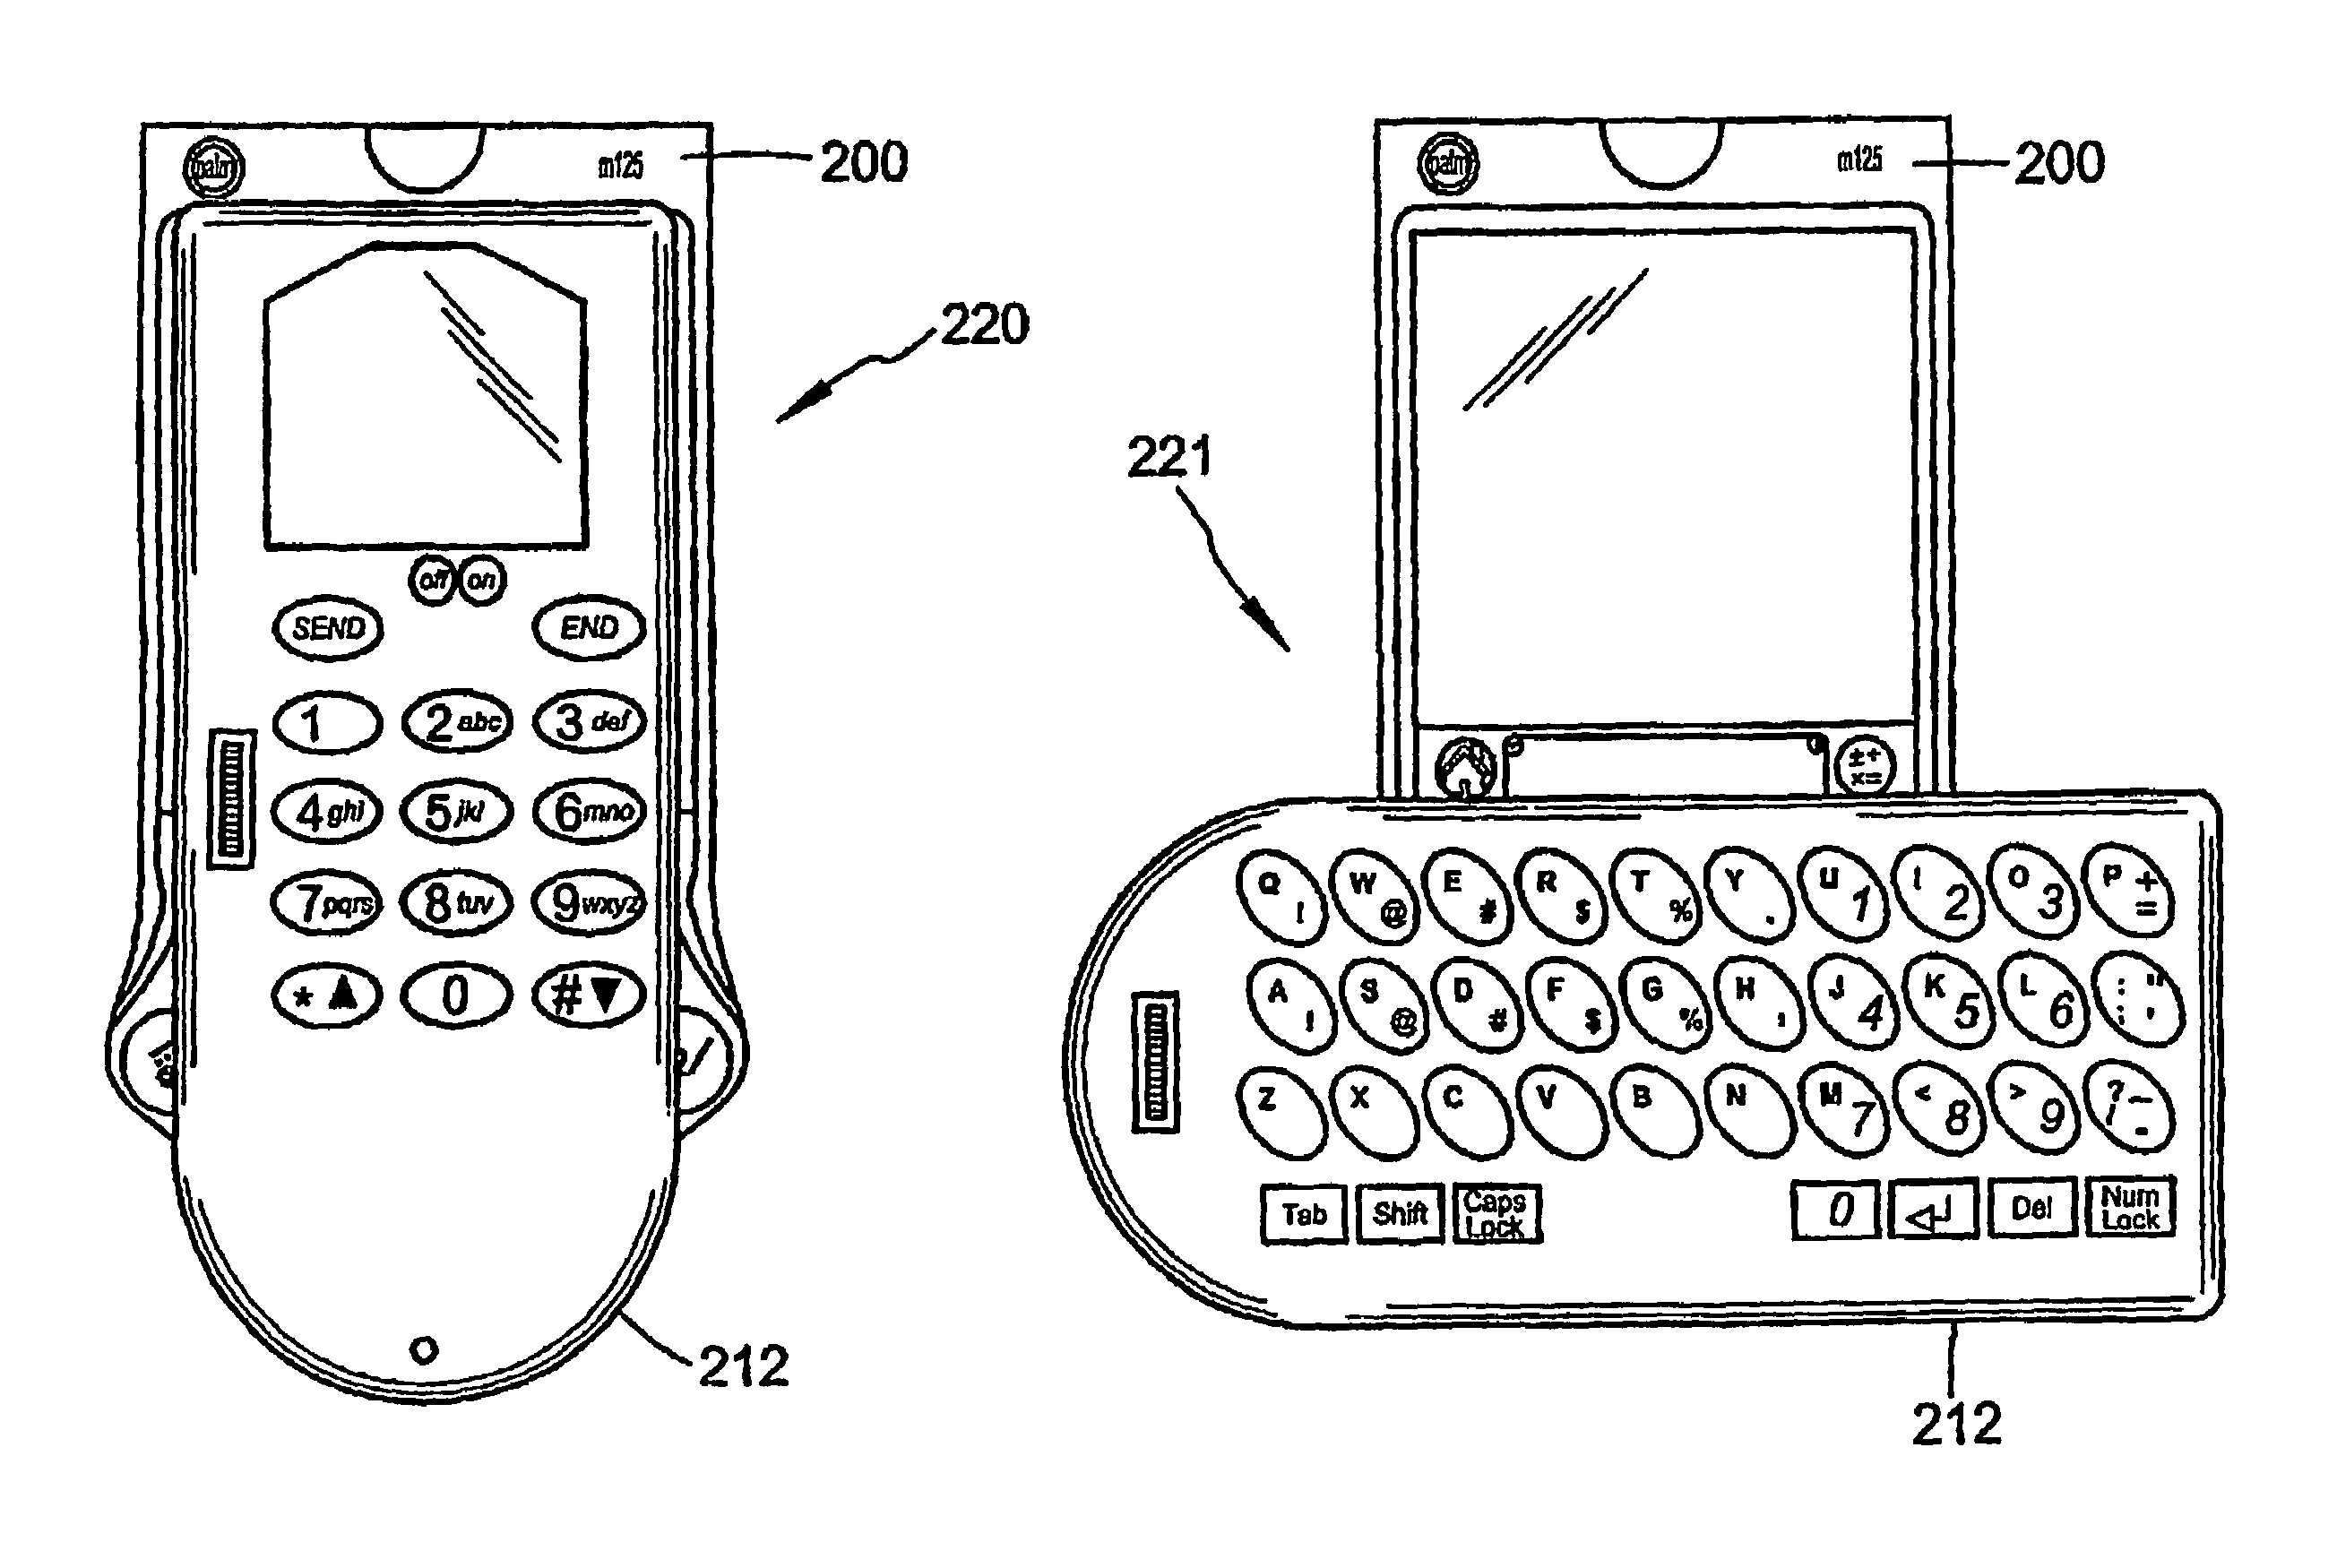 Portable data entry device with a detachable host PDA